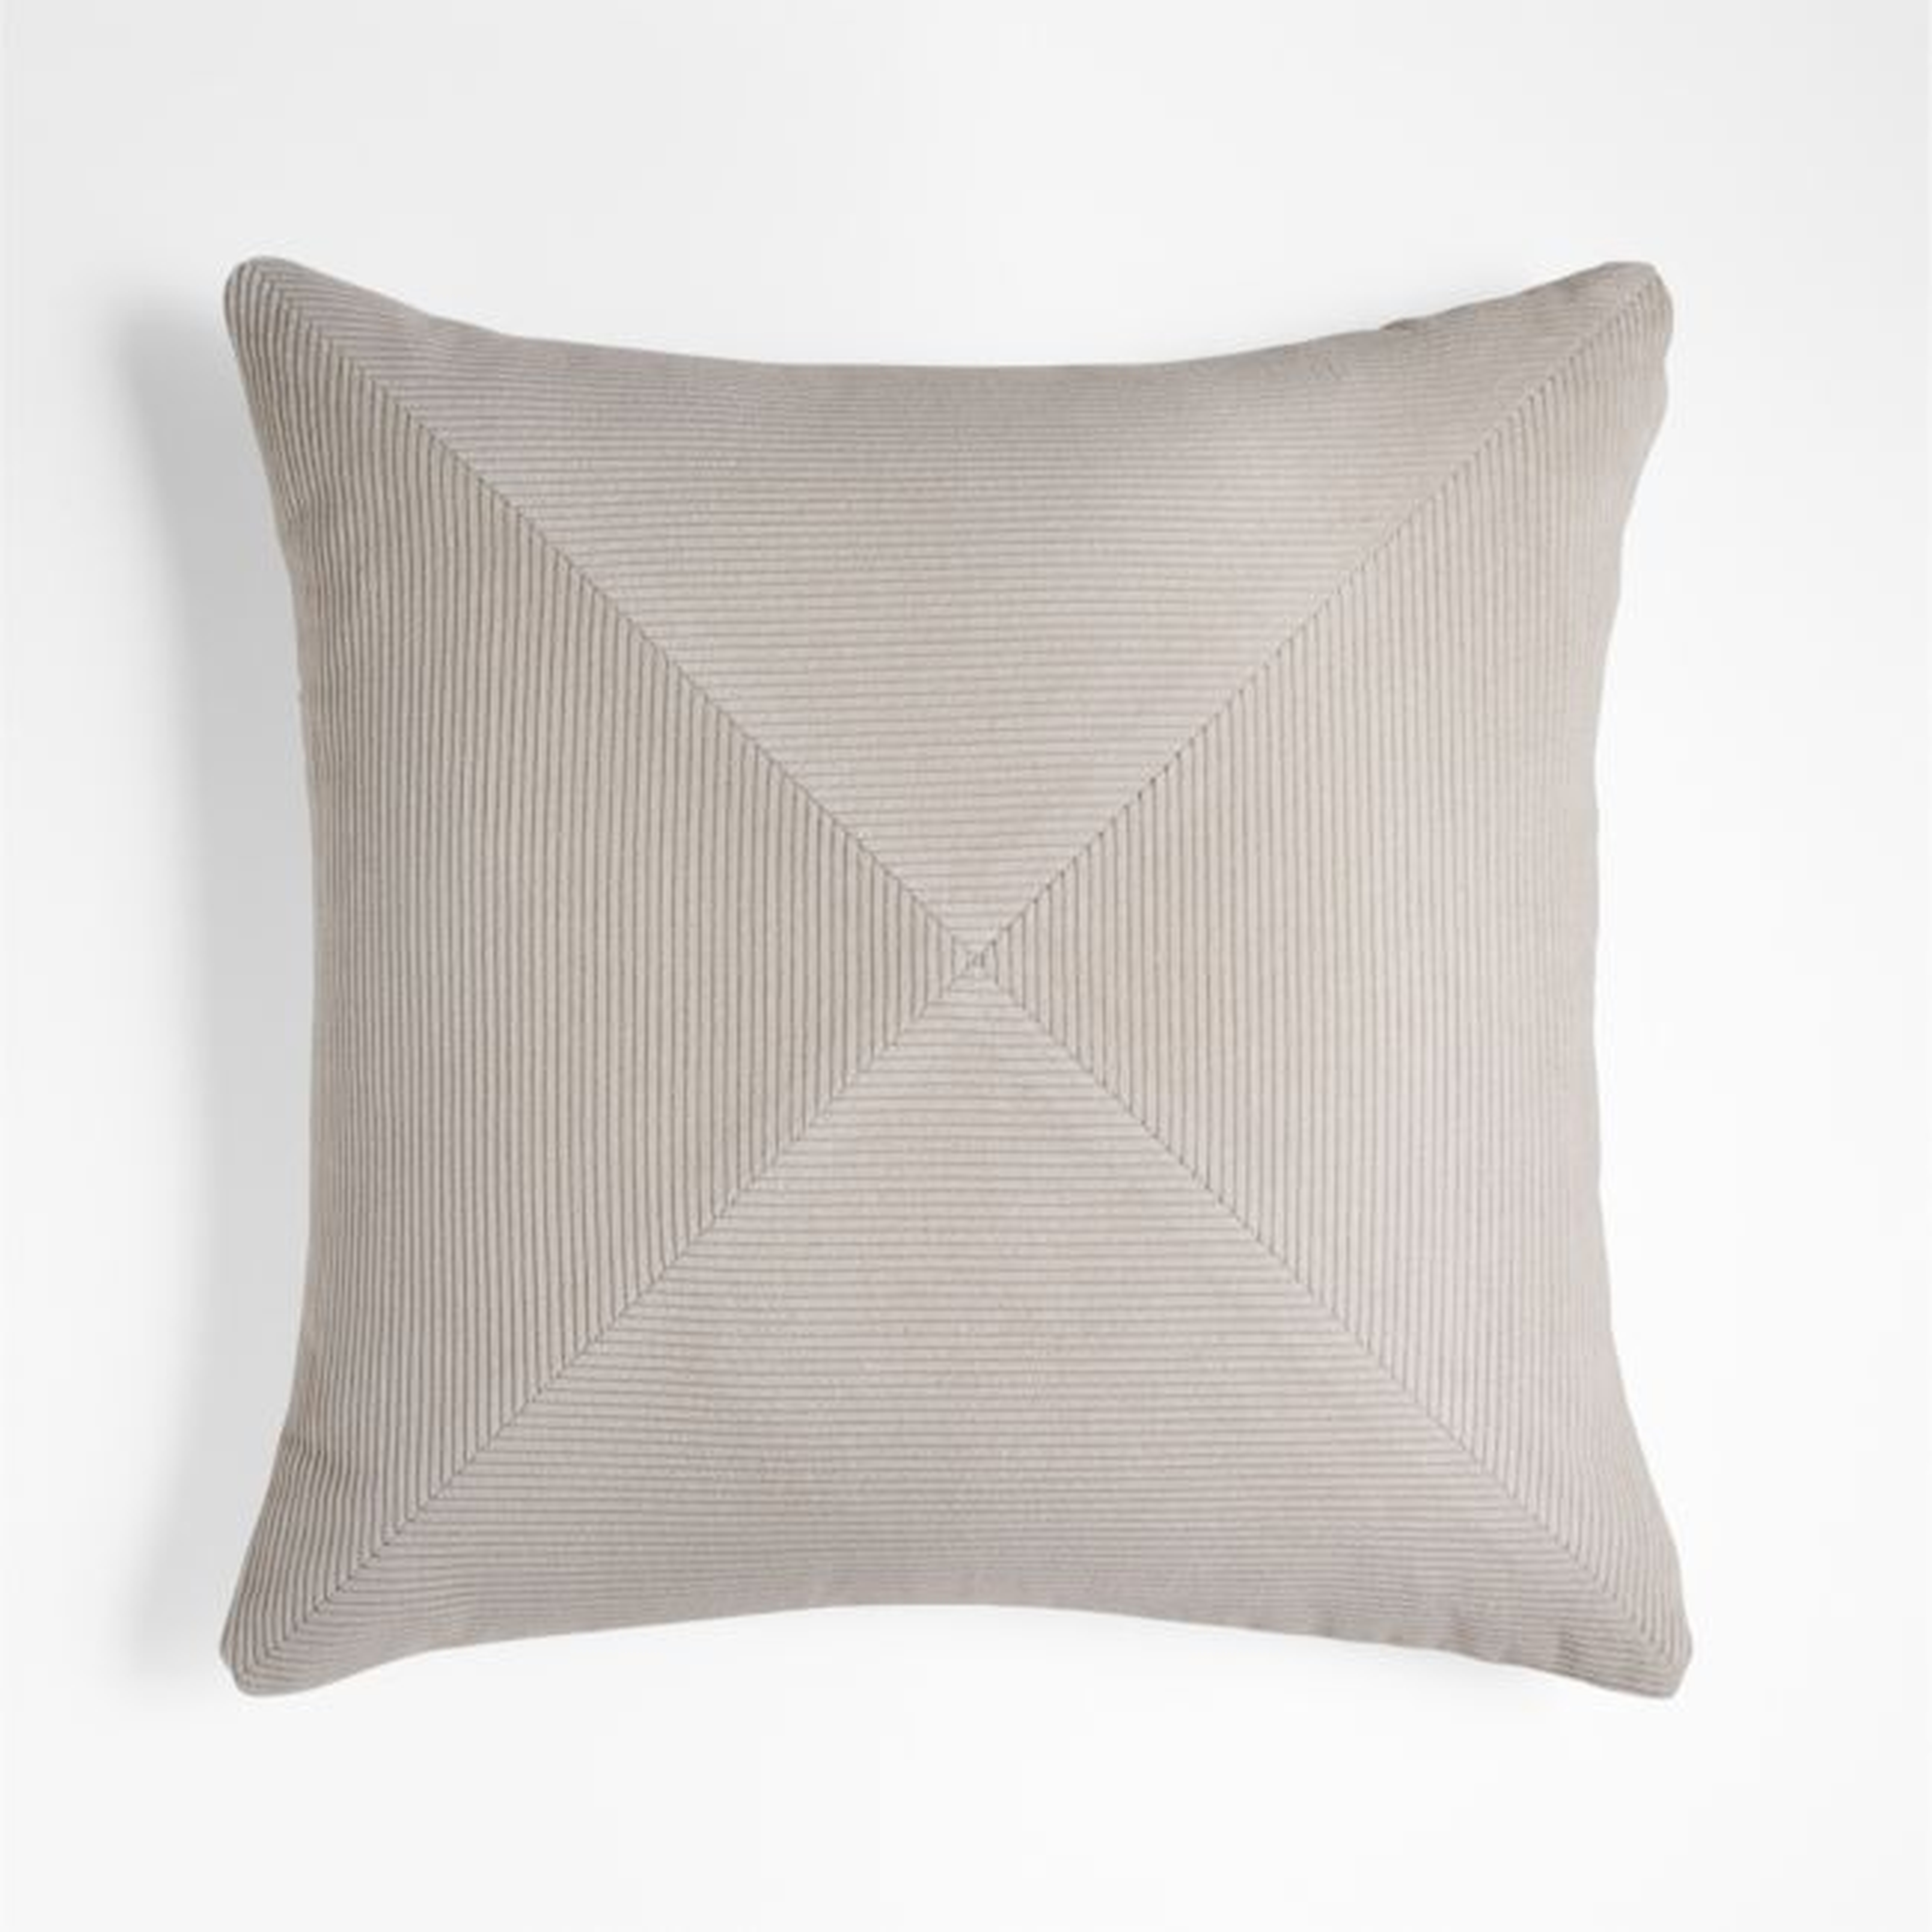 Cordell 20" White Corduroy Pillow Cover with Feather-Down Insert - Crate and Barrel